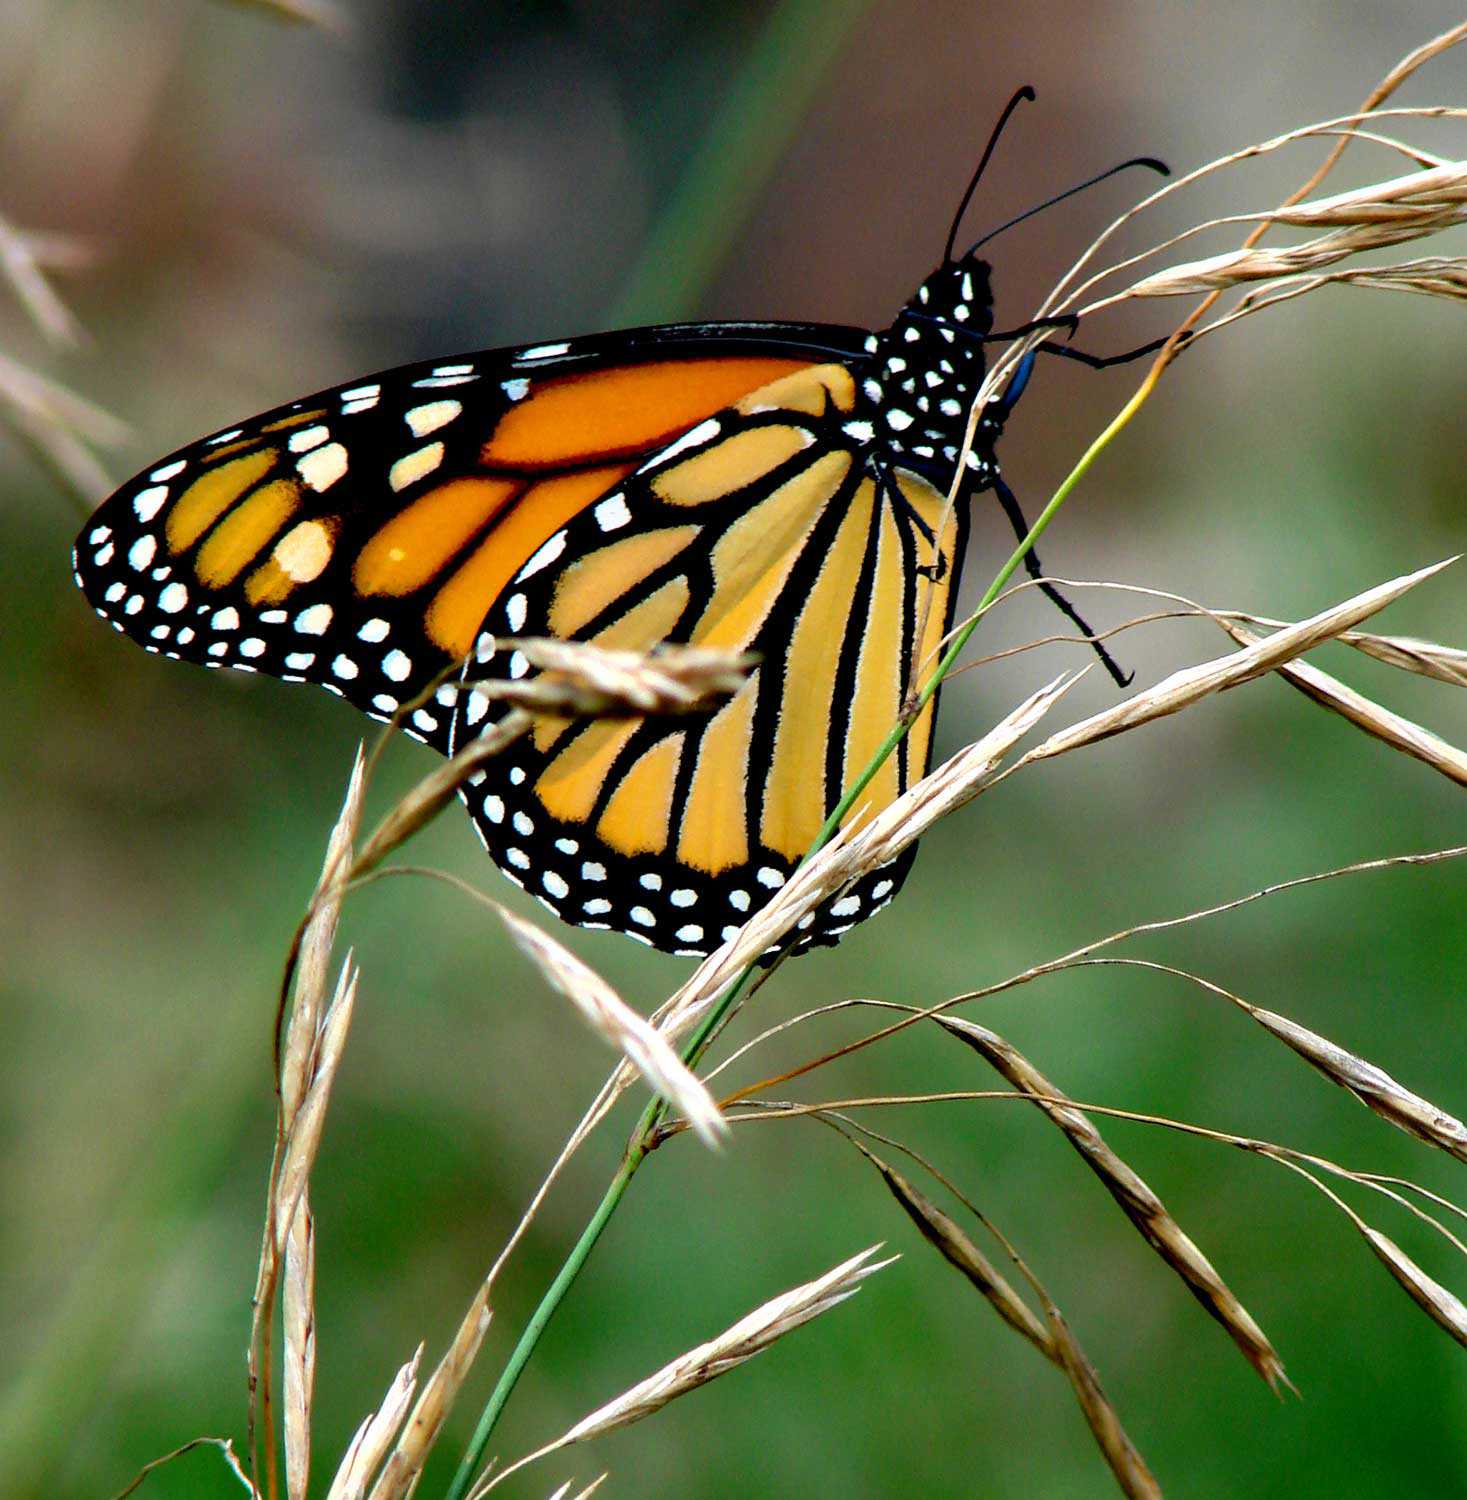 Monarch butterfly (Danaus plexippus) – special concern provincially and nationally